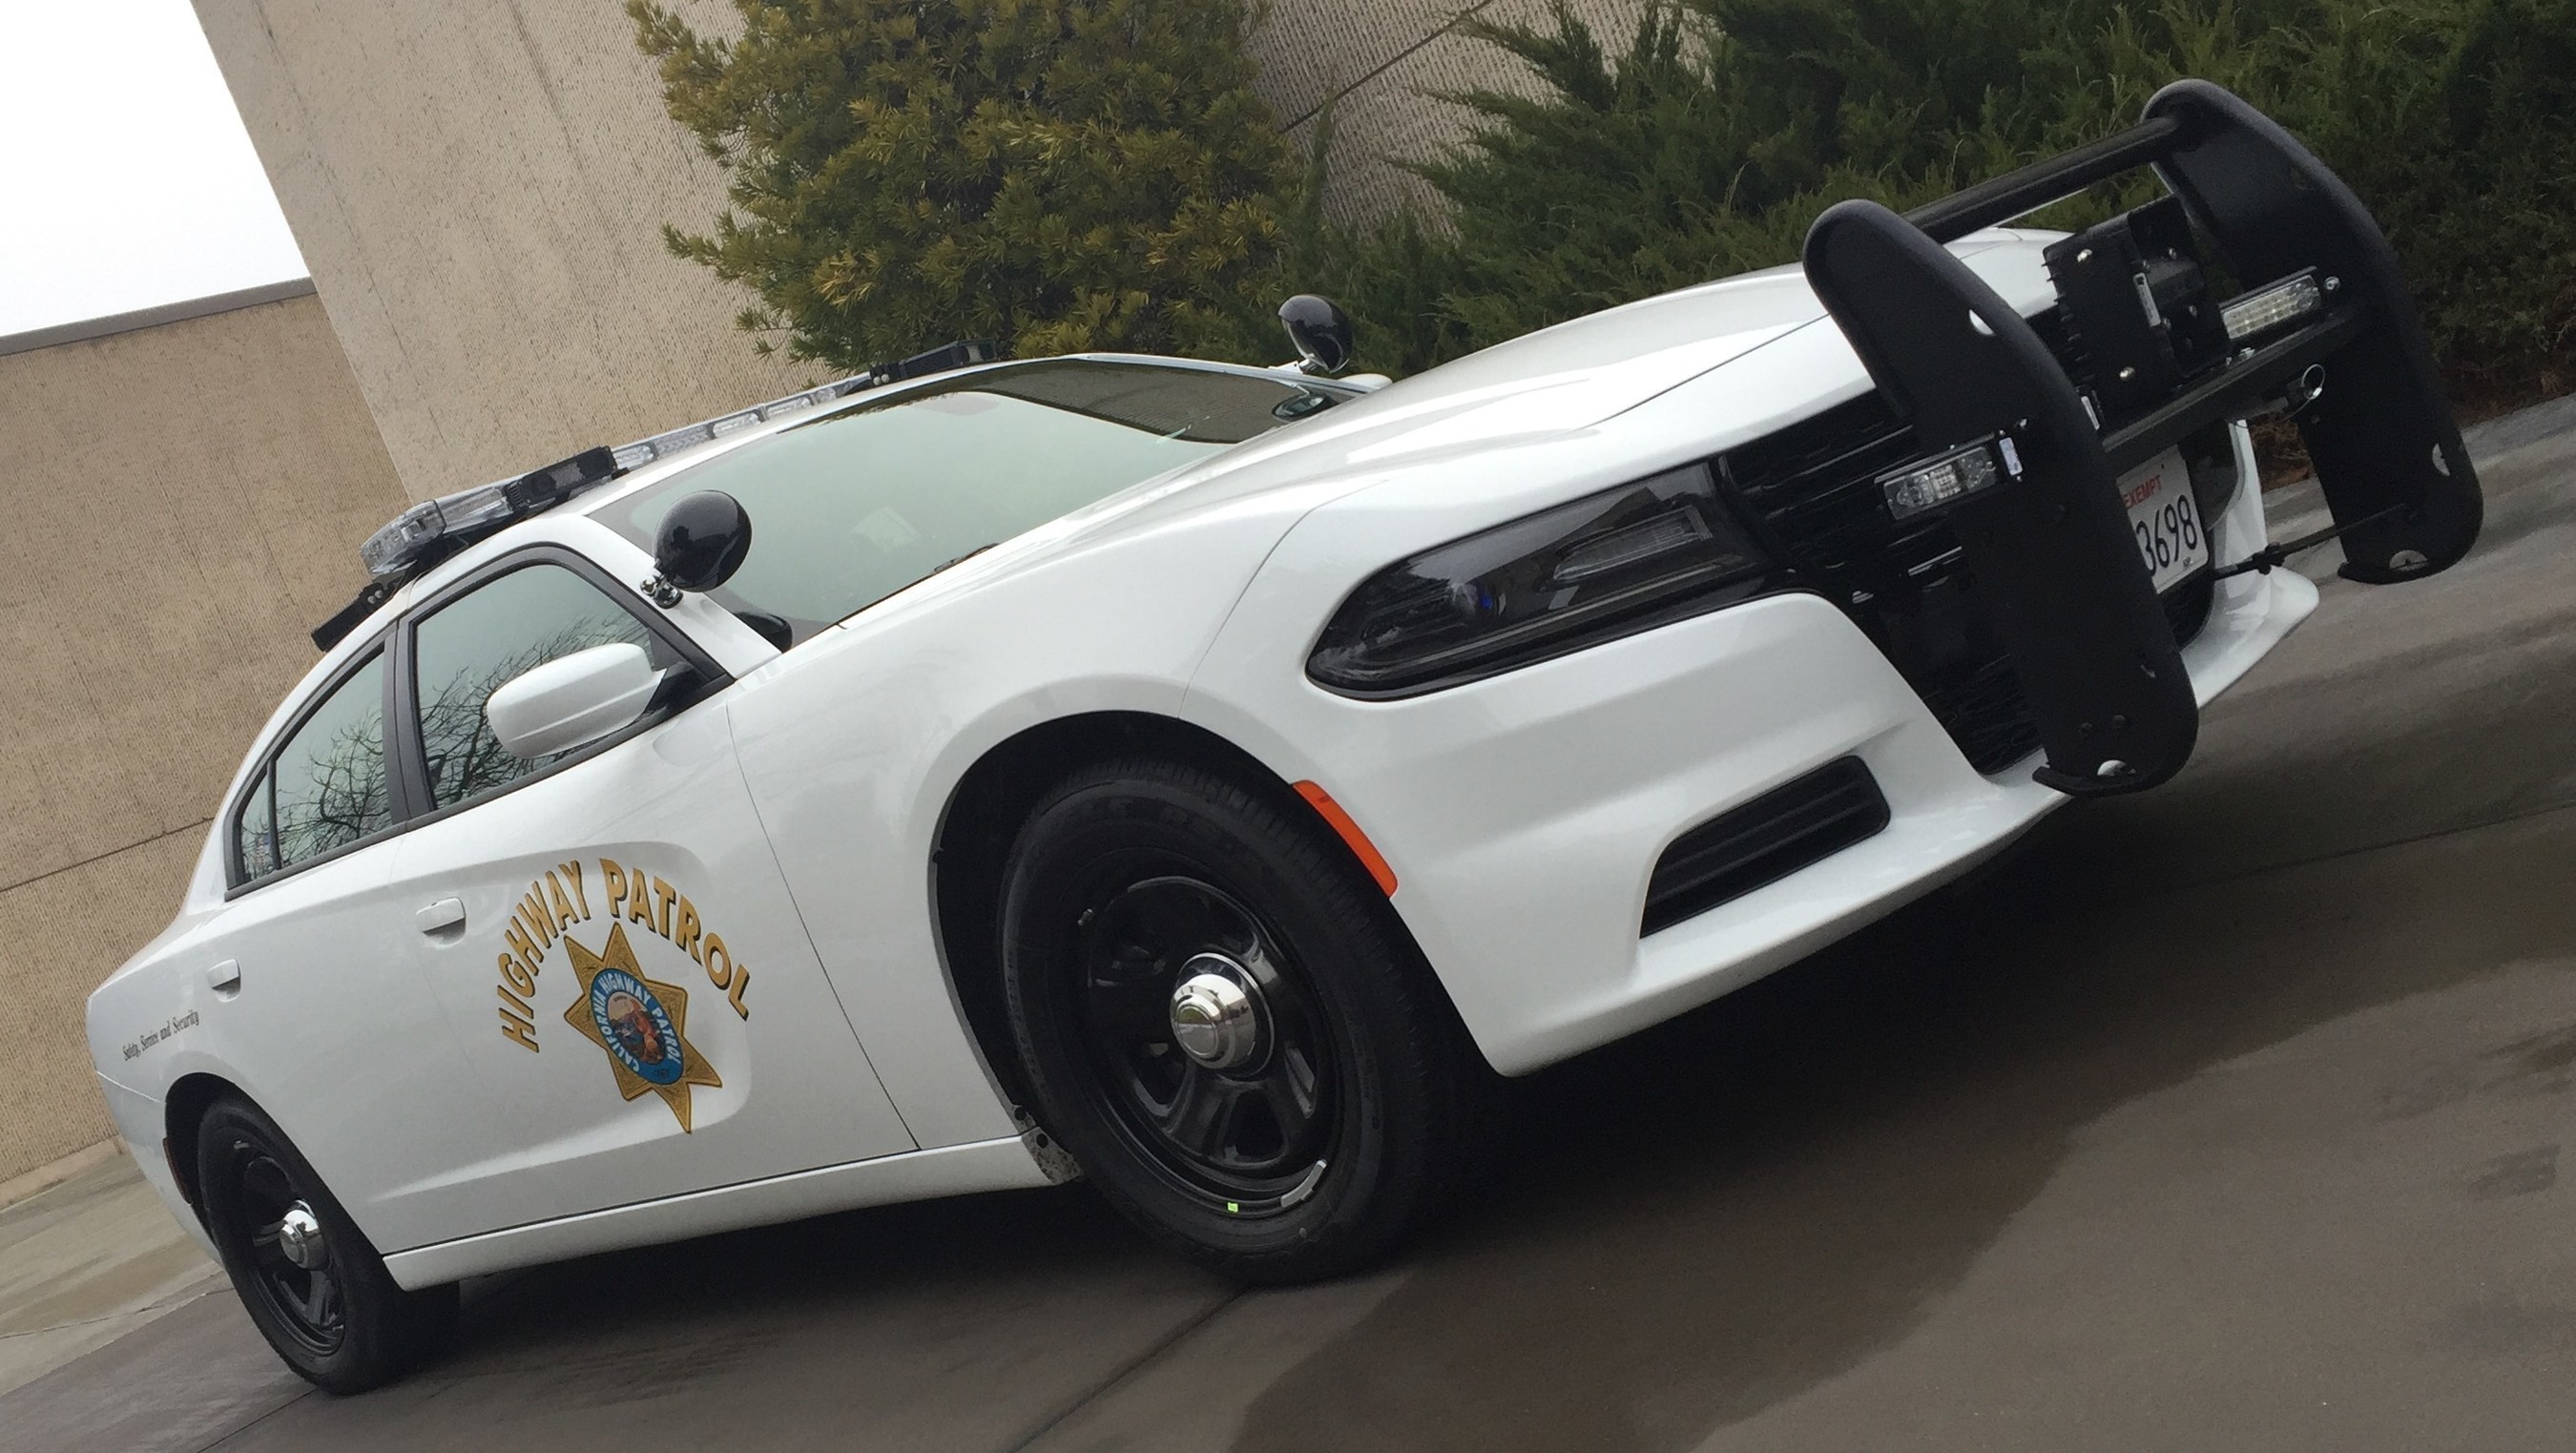 California Highway Patrol orders more than 580 Dodge Charger Pursuit police sedans.